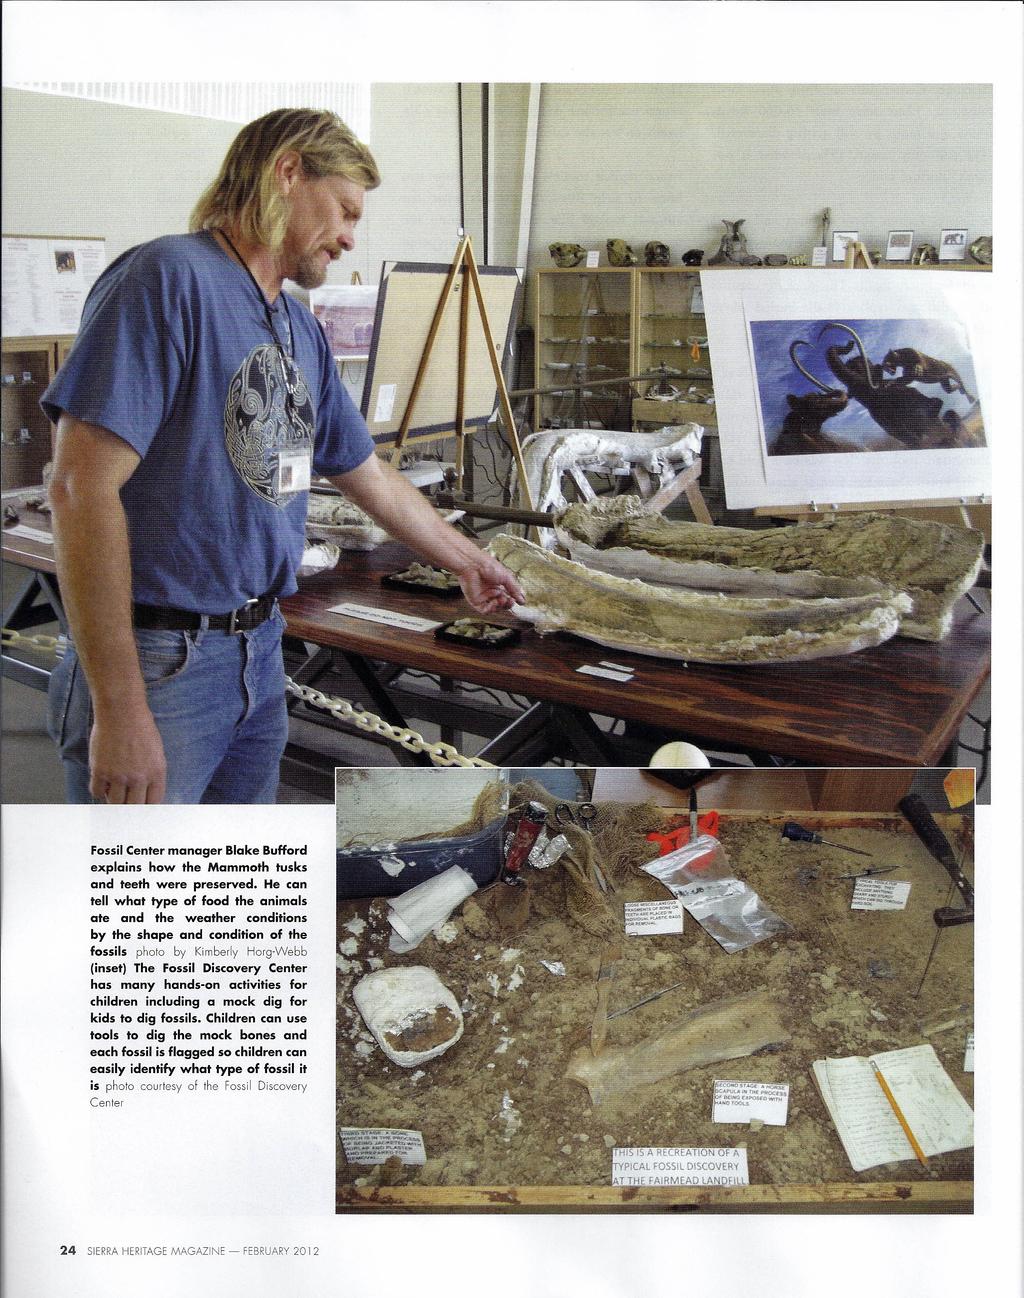 Fossil manager Blake Bufford explains how the Mammoth tusks and teeth were preserved.